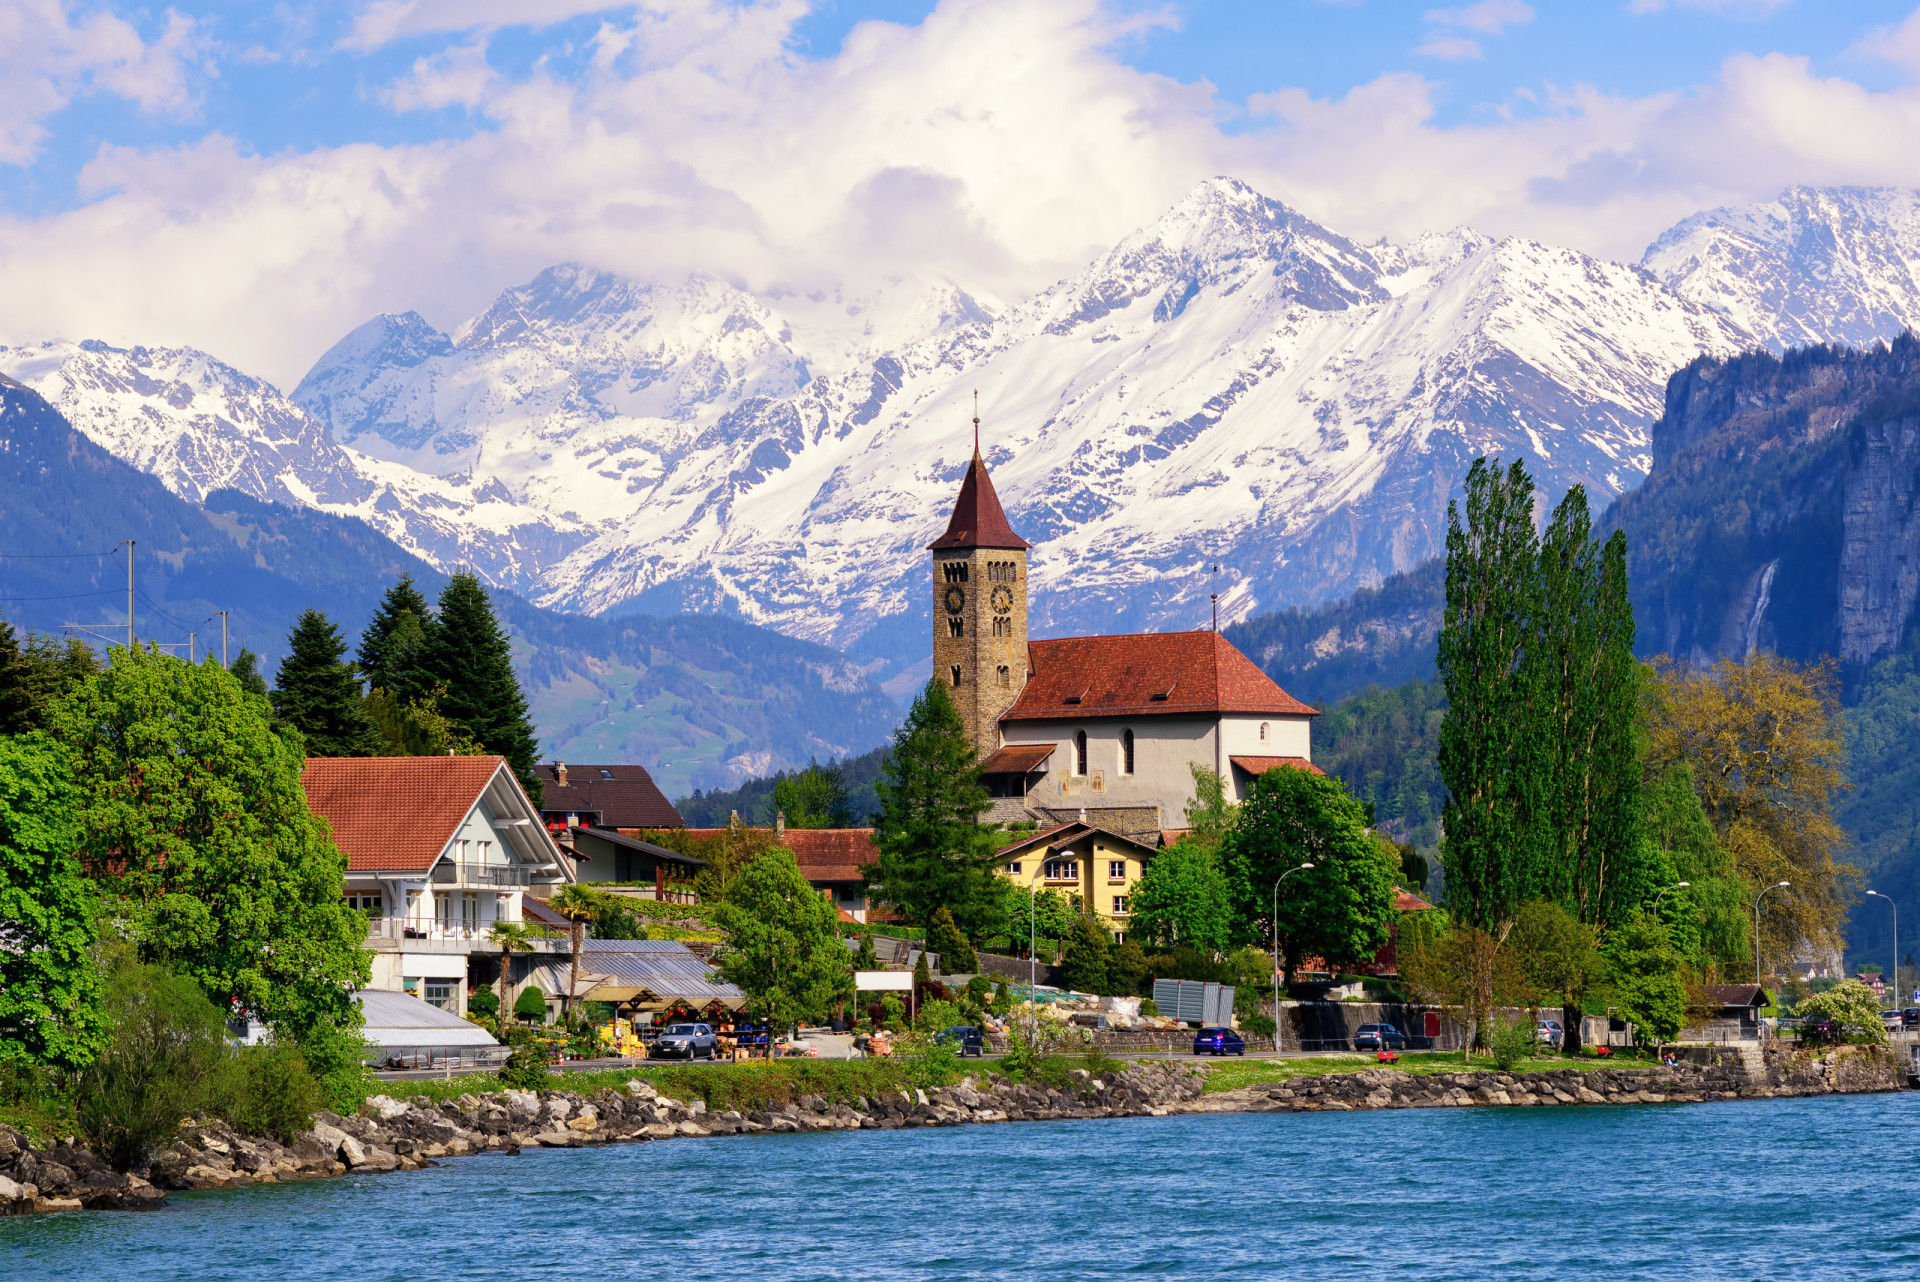 <p>Switzerland's tourist tax also varies depending on the location. A common amount is 2.50 Swiss francs (US$2.50) per night.</p><p>You may also like:<a href="https://www.starsinsider.com/n/466133?utm_source=msn.com&utm_medium=display&utm_campaign=referral_description&utm_content=683481en-my"> Golf's great celebratory moments</a></p>